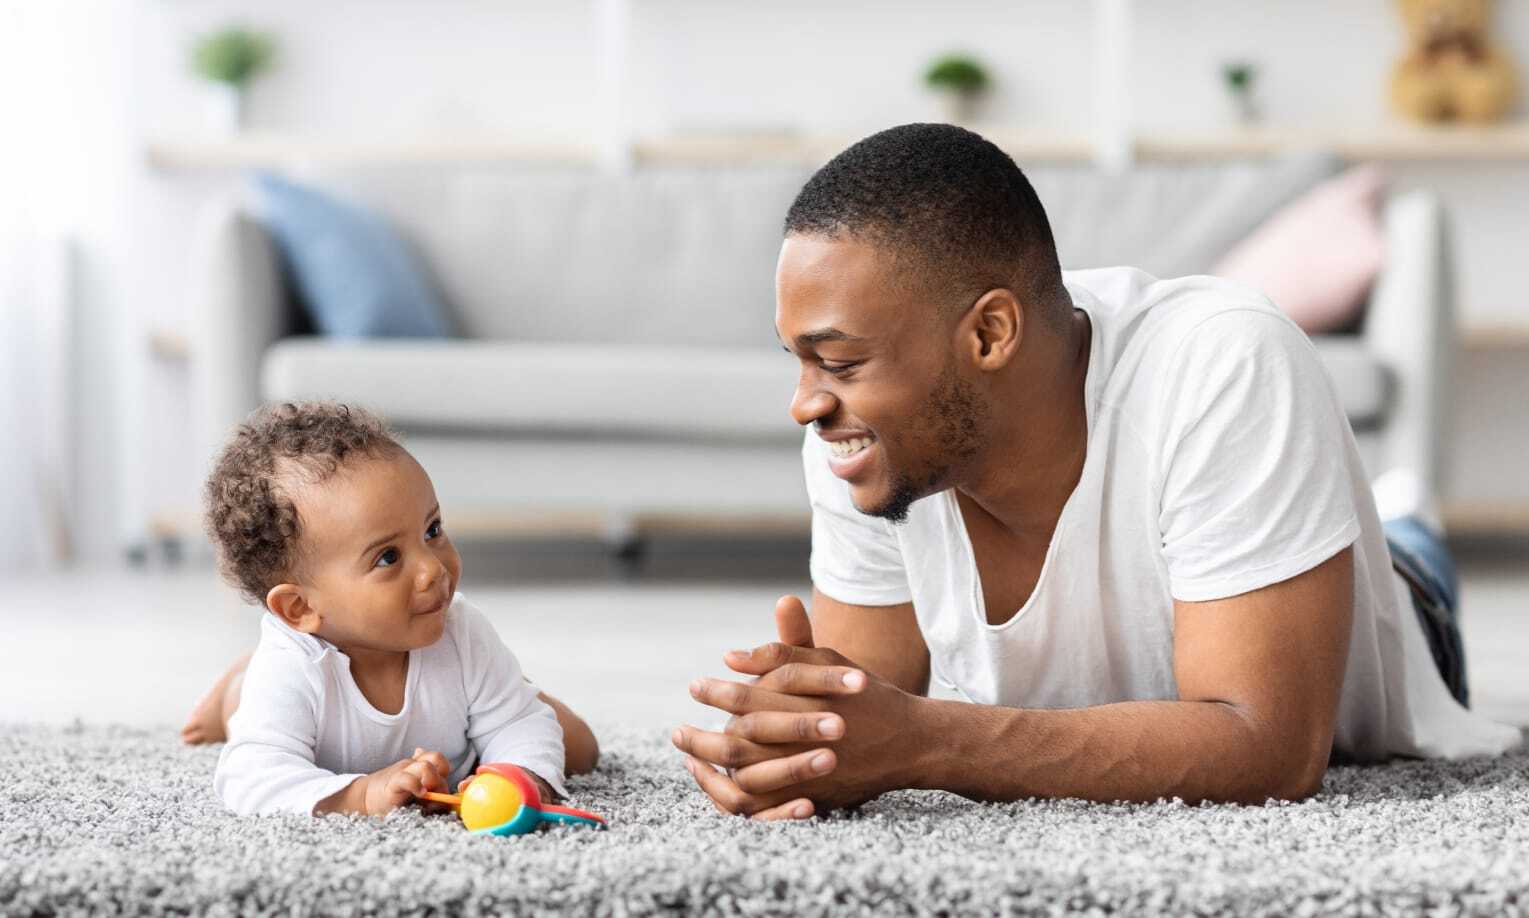 Paternity Leave: A Win-Win for All